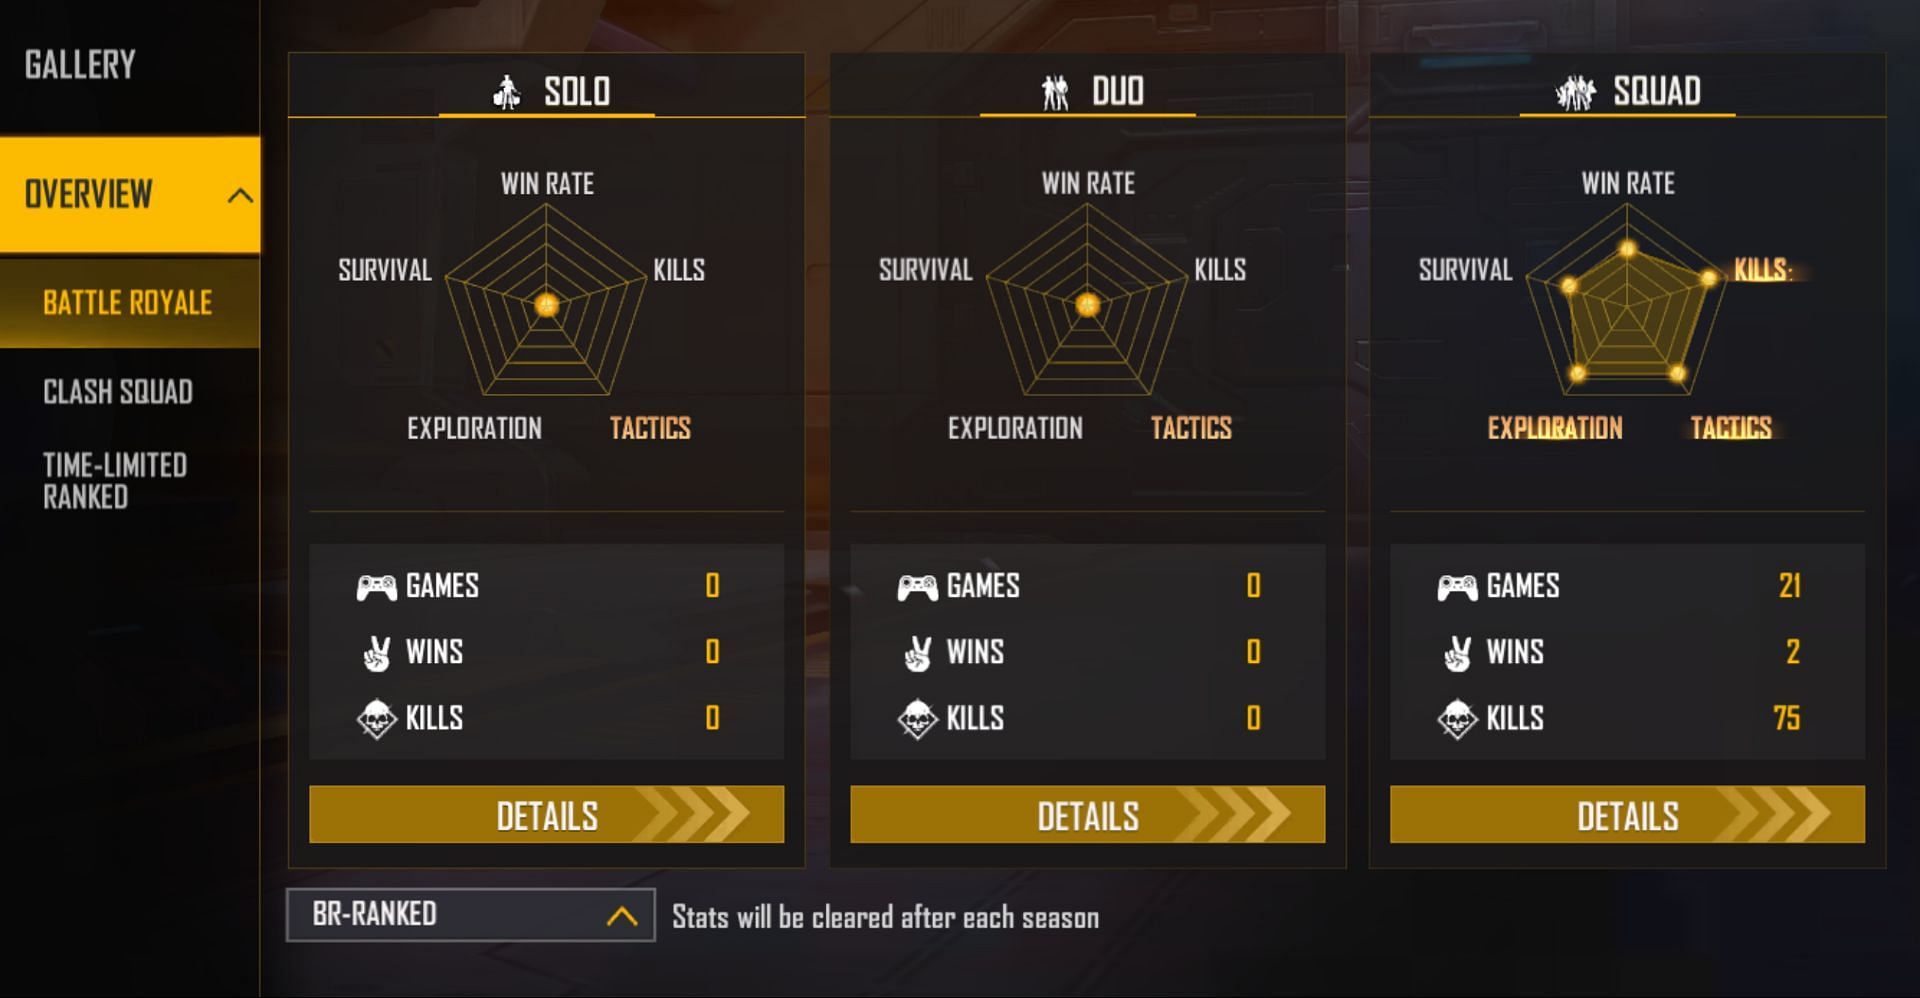 BNL has played only squad games (Image via Garena)